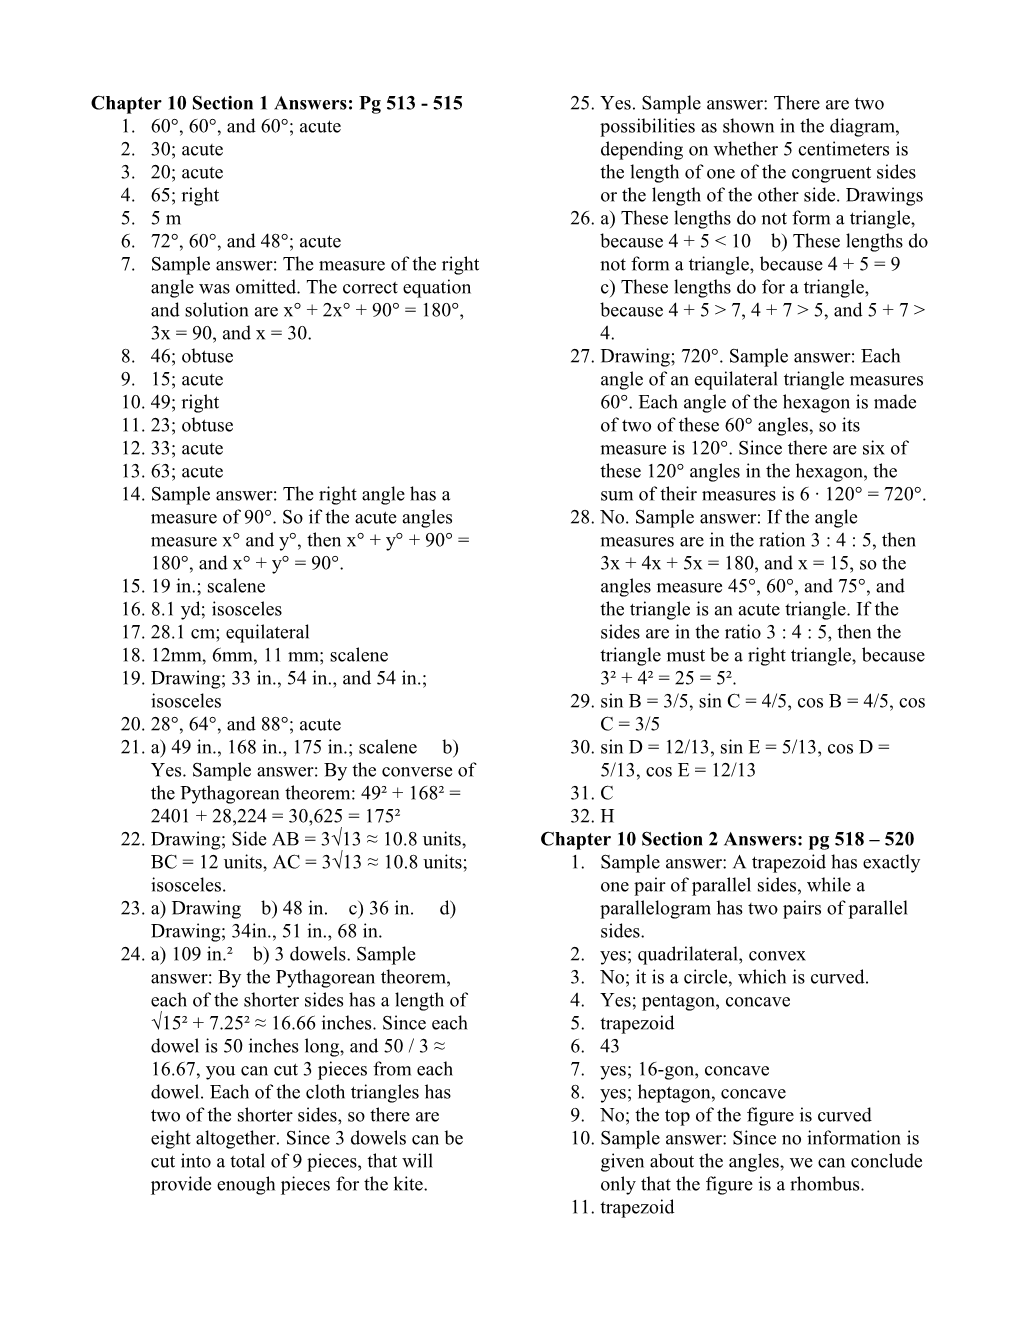 Chapter 10 Section 1 Answers: Pg 513 - 515